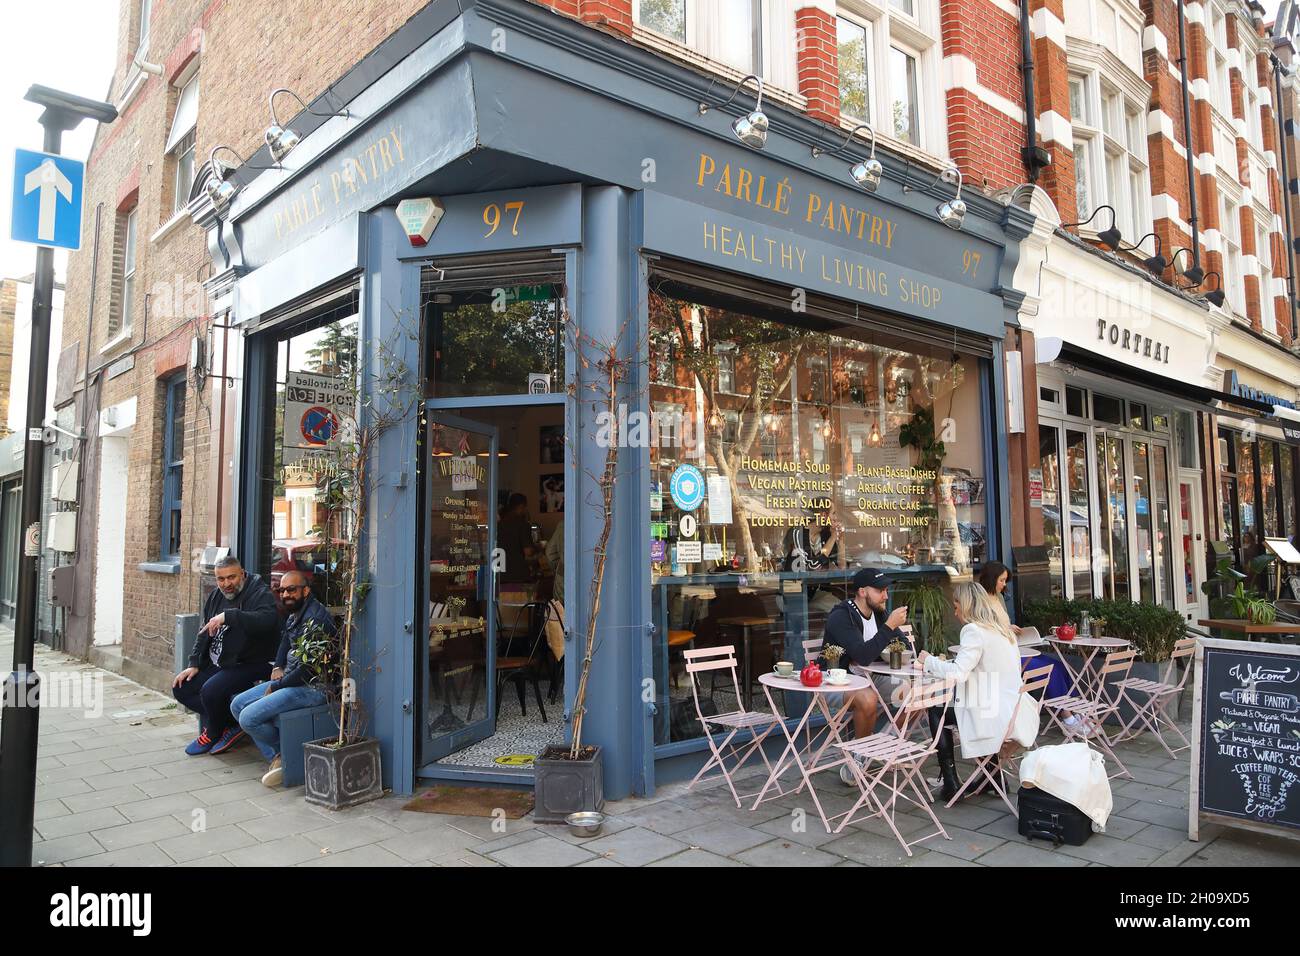 The Parle Pantry vegan healthy living shop on Chiswick High Road, London, UK Stock Photo